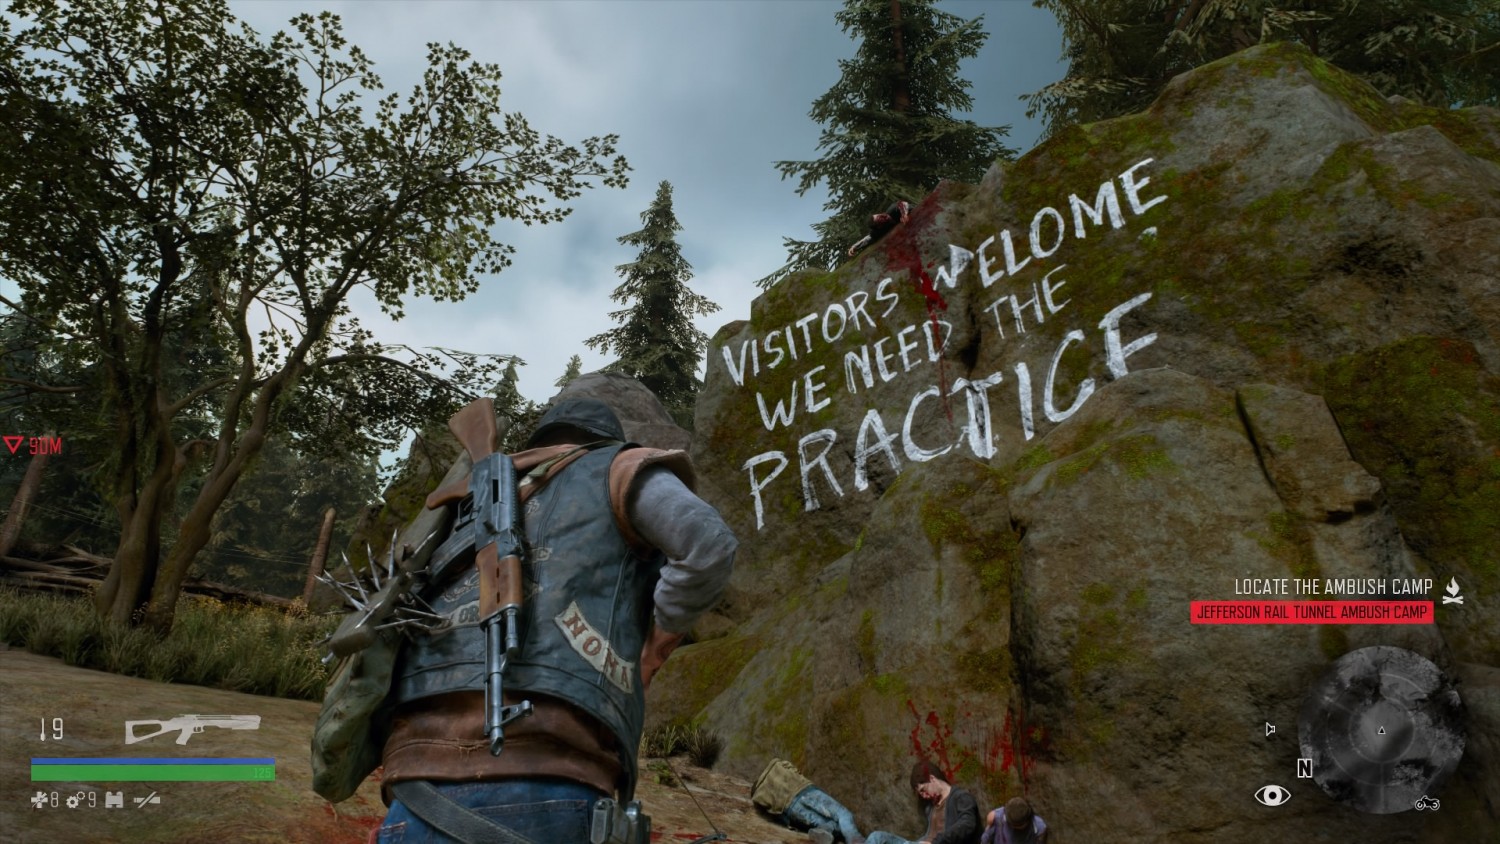 Review: Sony's new 'Days Gone' PS4 game brings a zombie apocalypse to the  Pacific Northwest – GeekWire